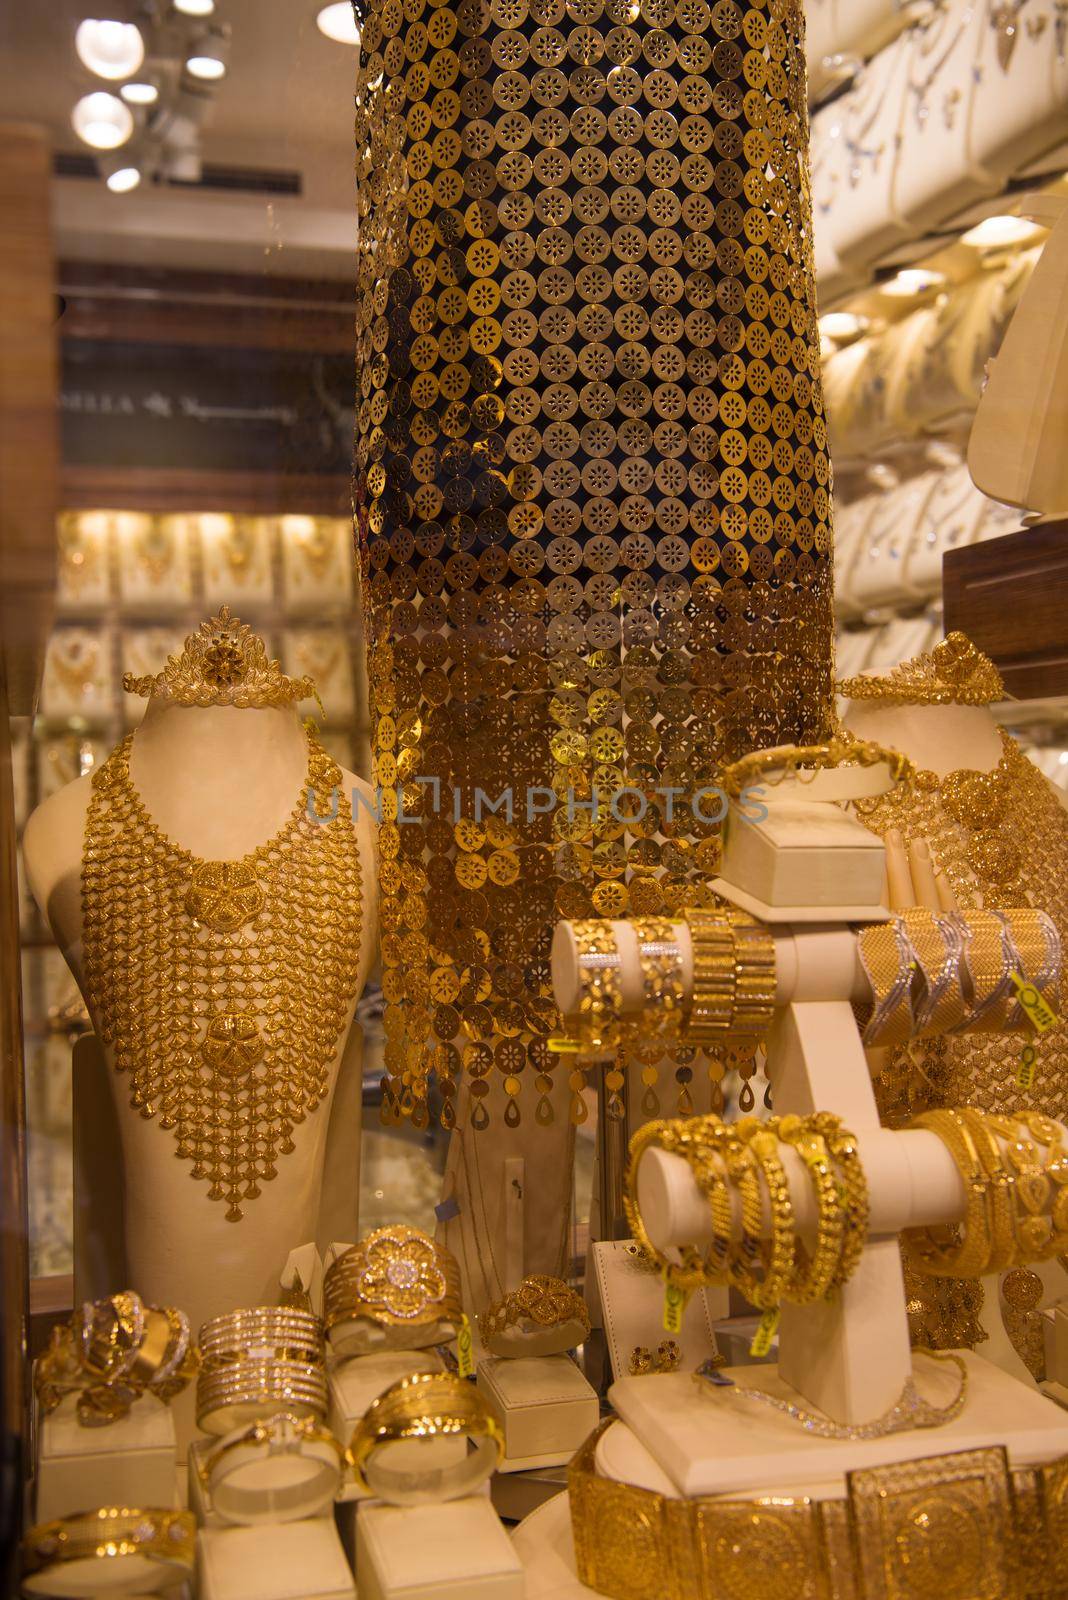 gold jewelry in the shop window by dotshock